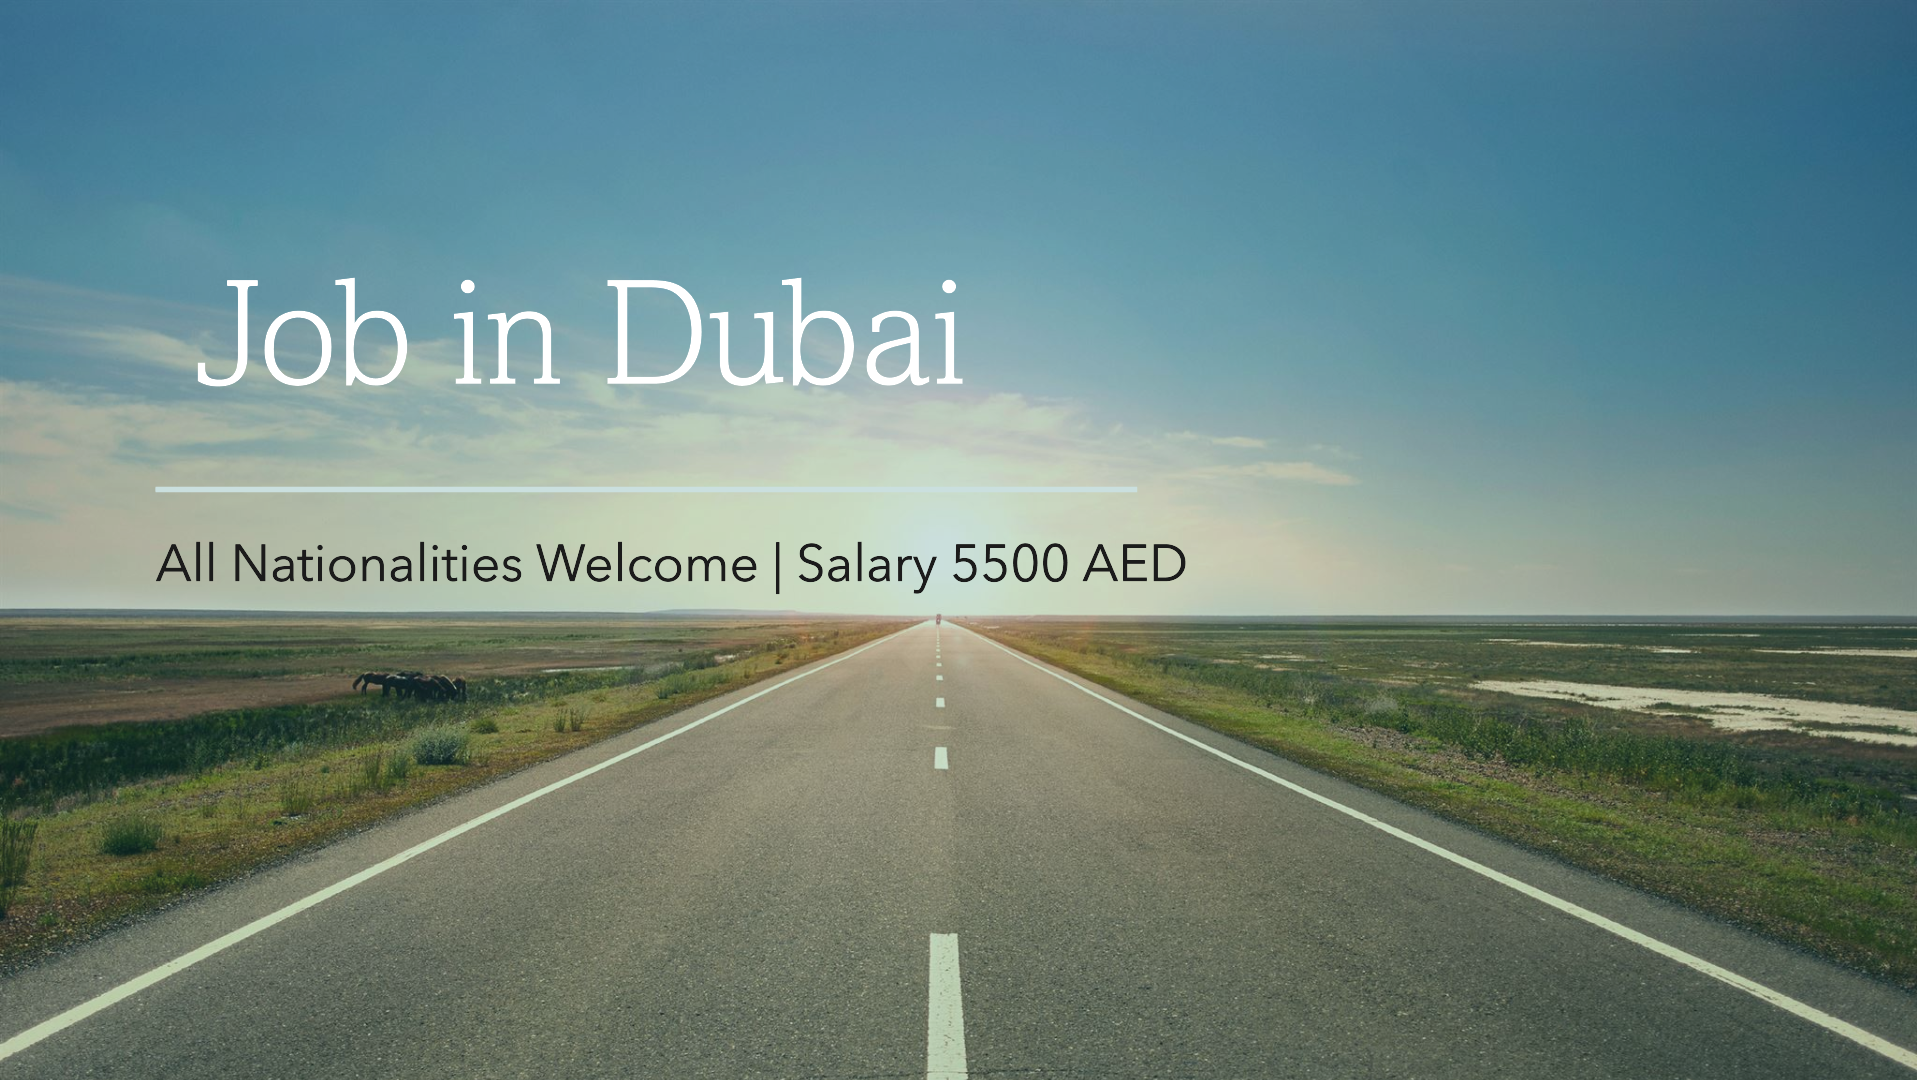 jobs in dubai for all nationalities with salary 5500 AED